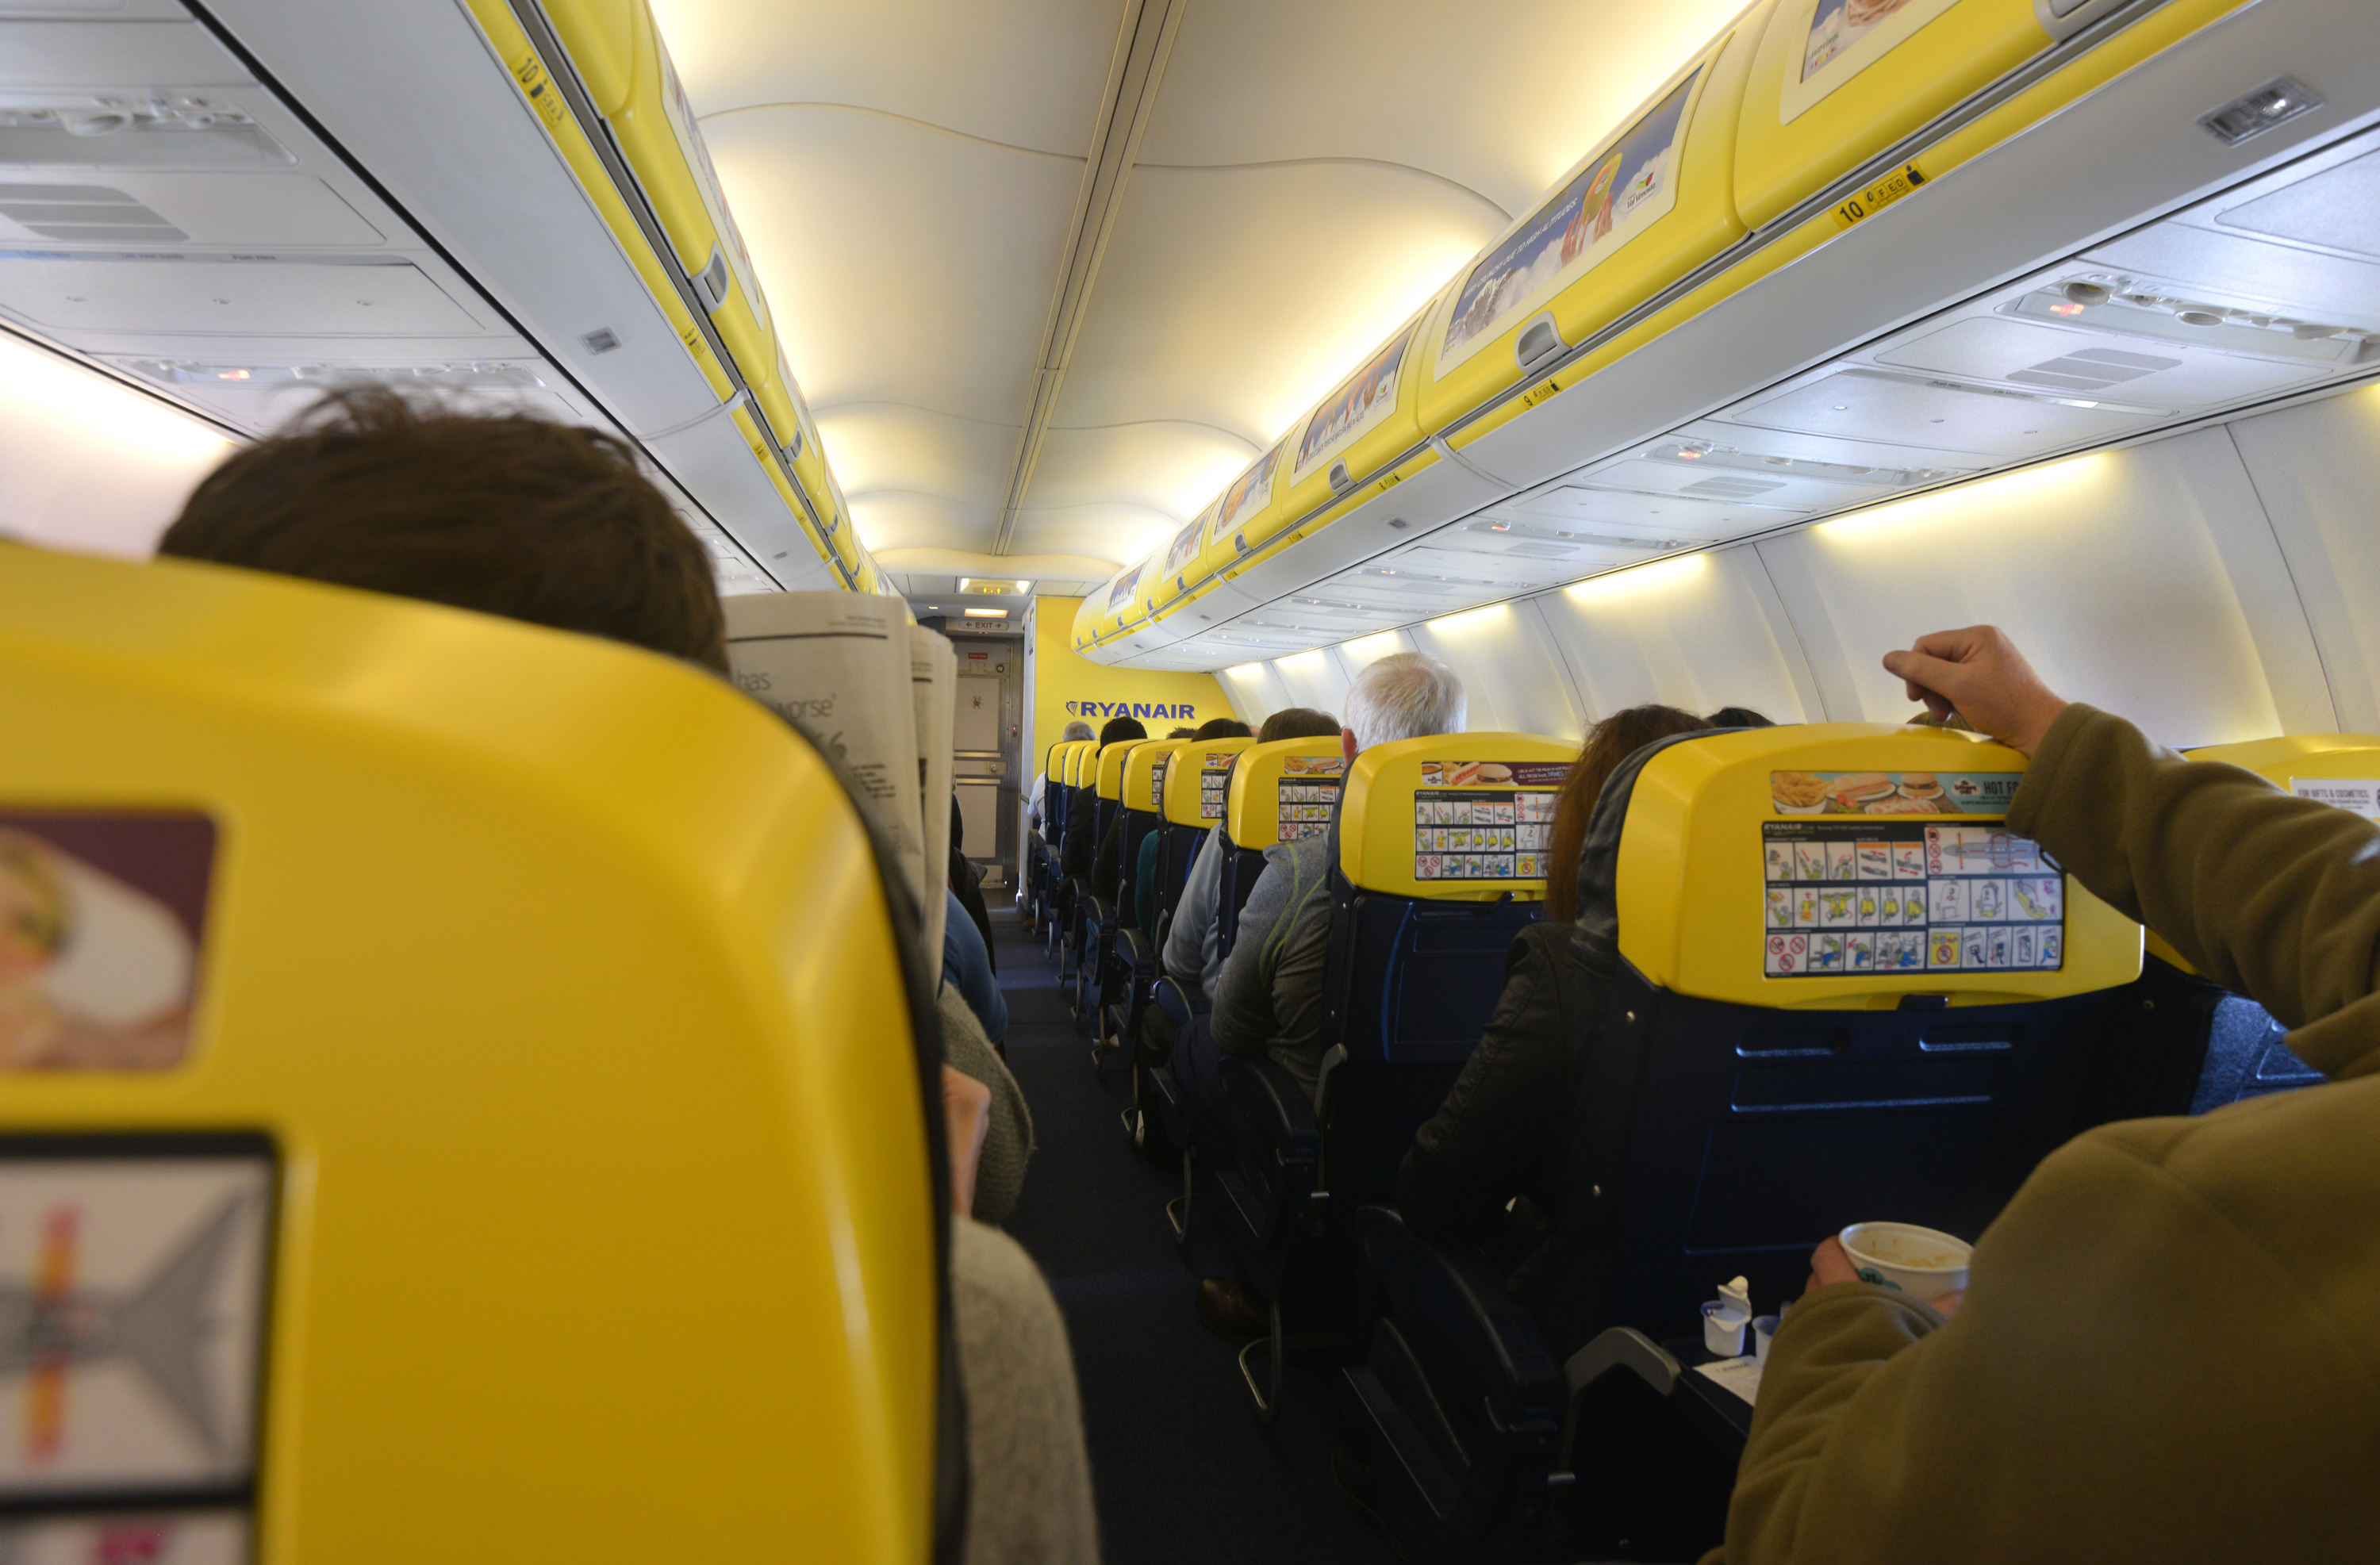 commercial aviation - What does Ryanair do without Sick Bags ...